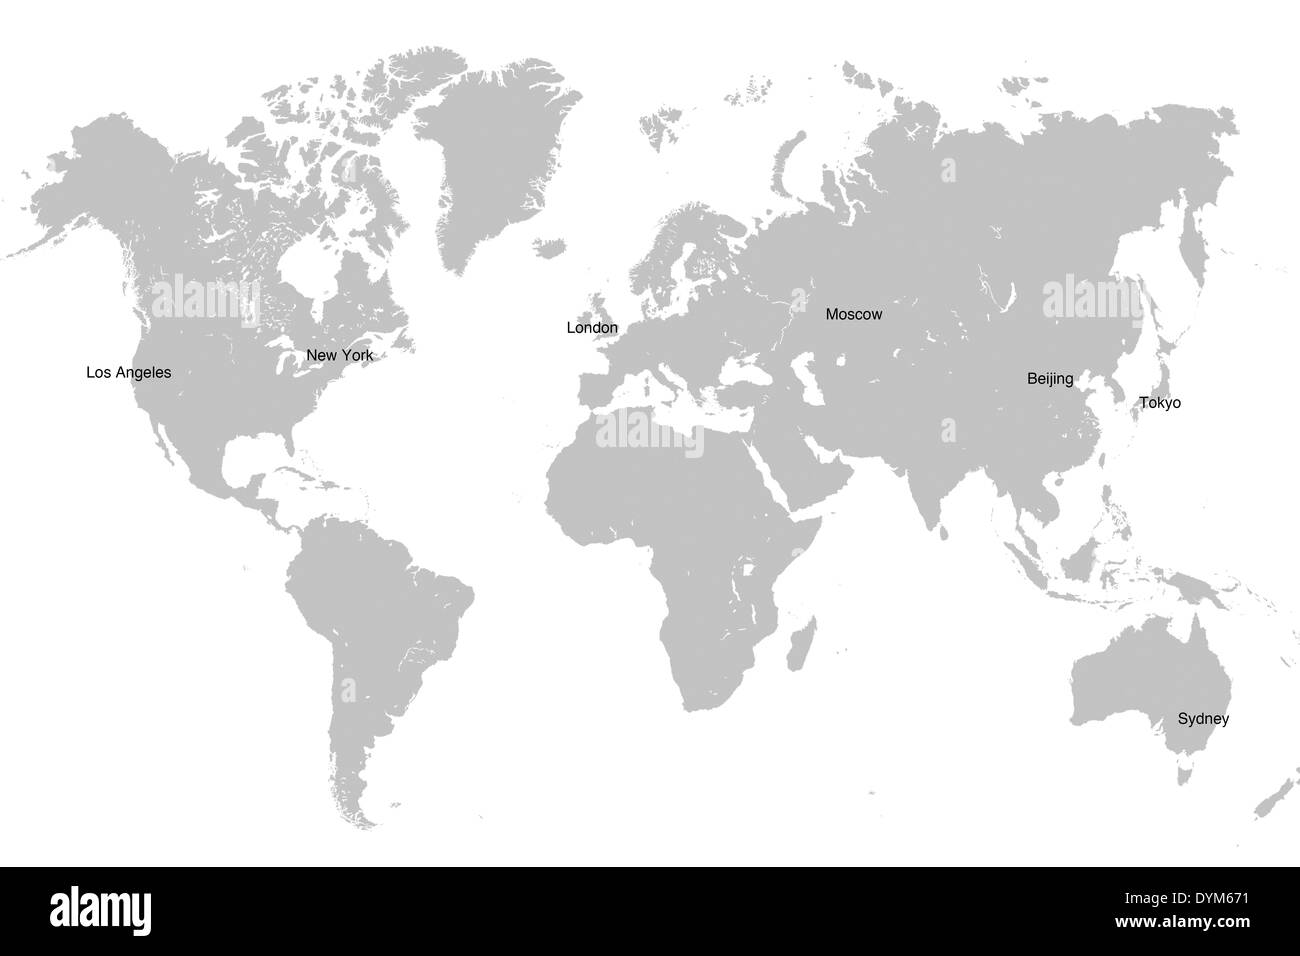 Grey World Map Isolated On White Background With Main Capital Cities